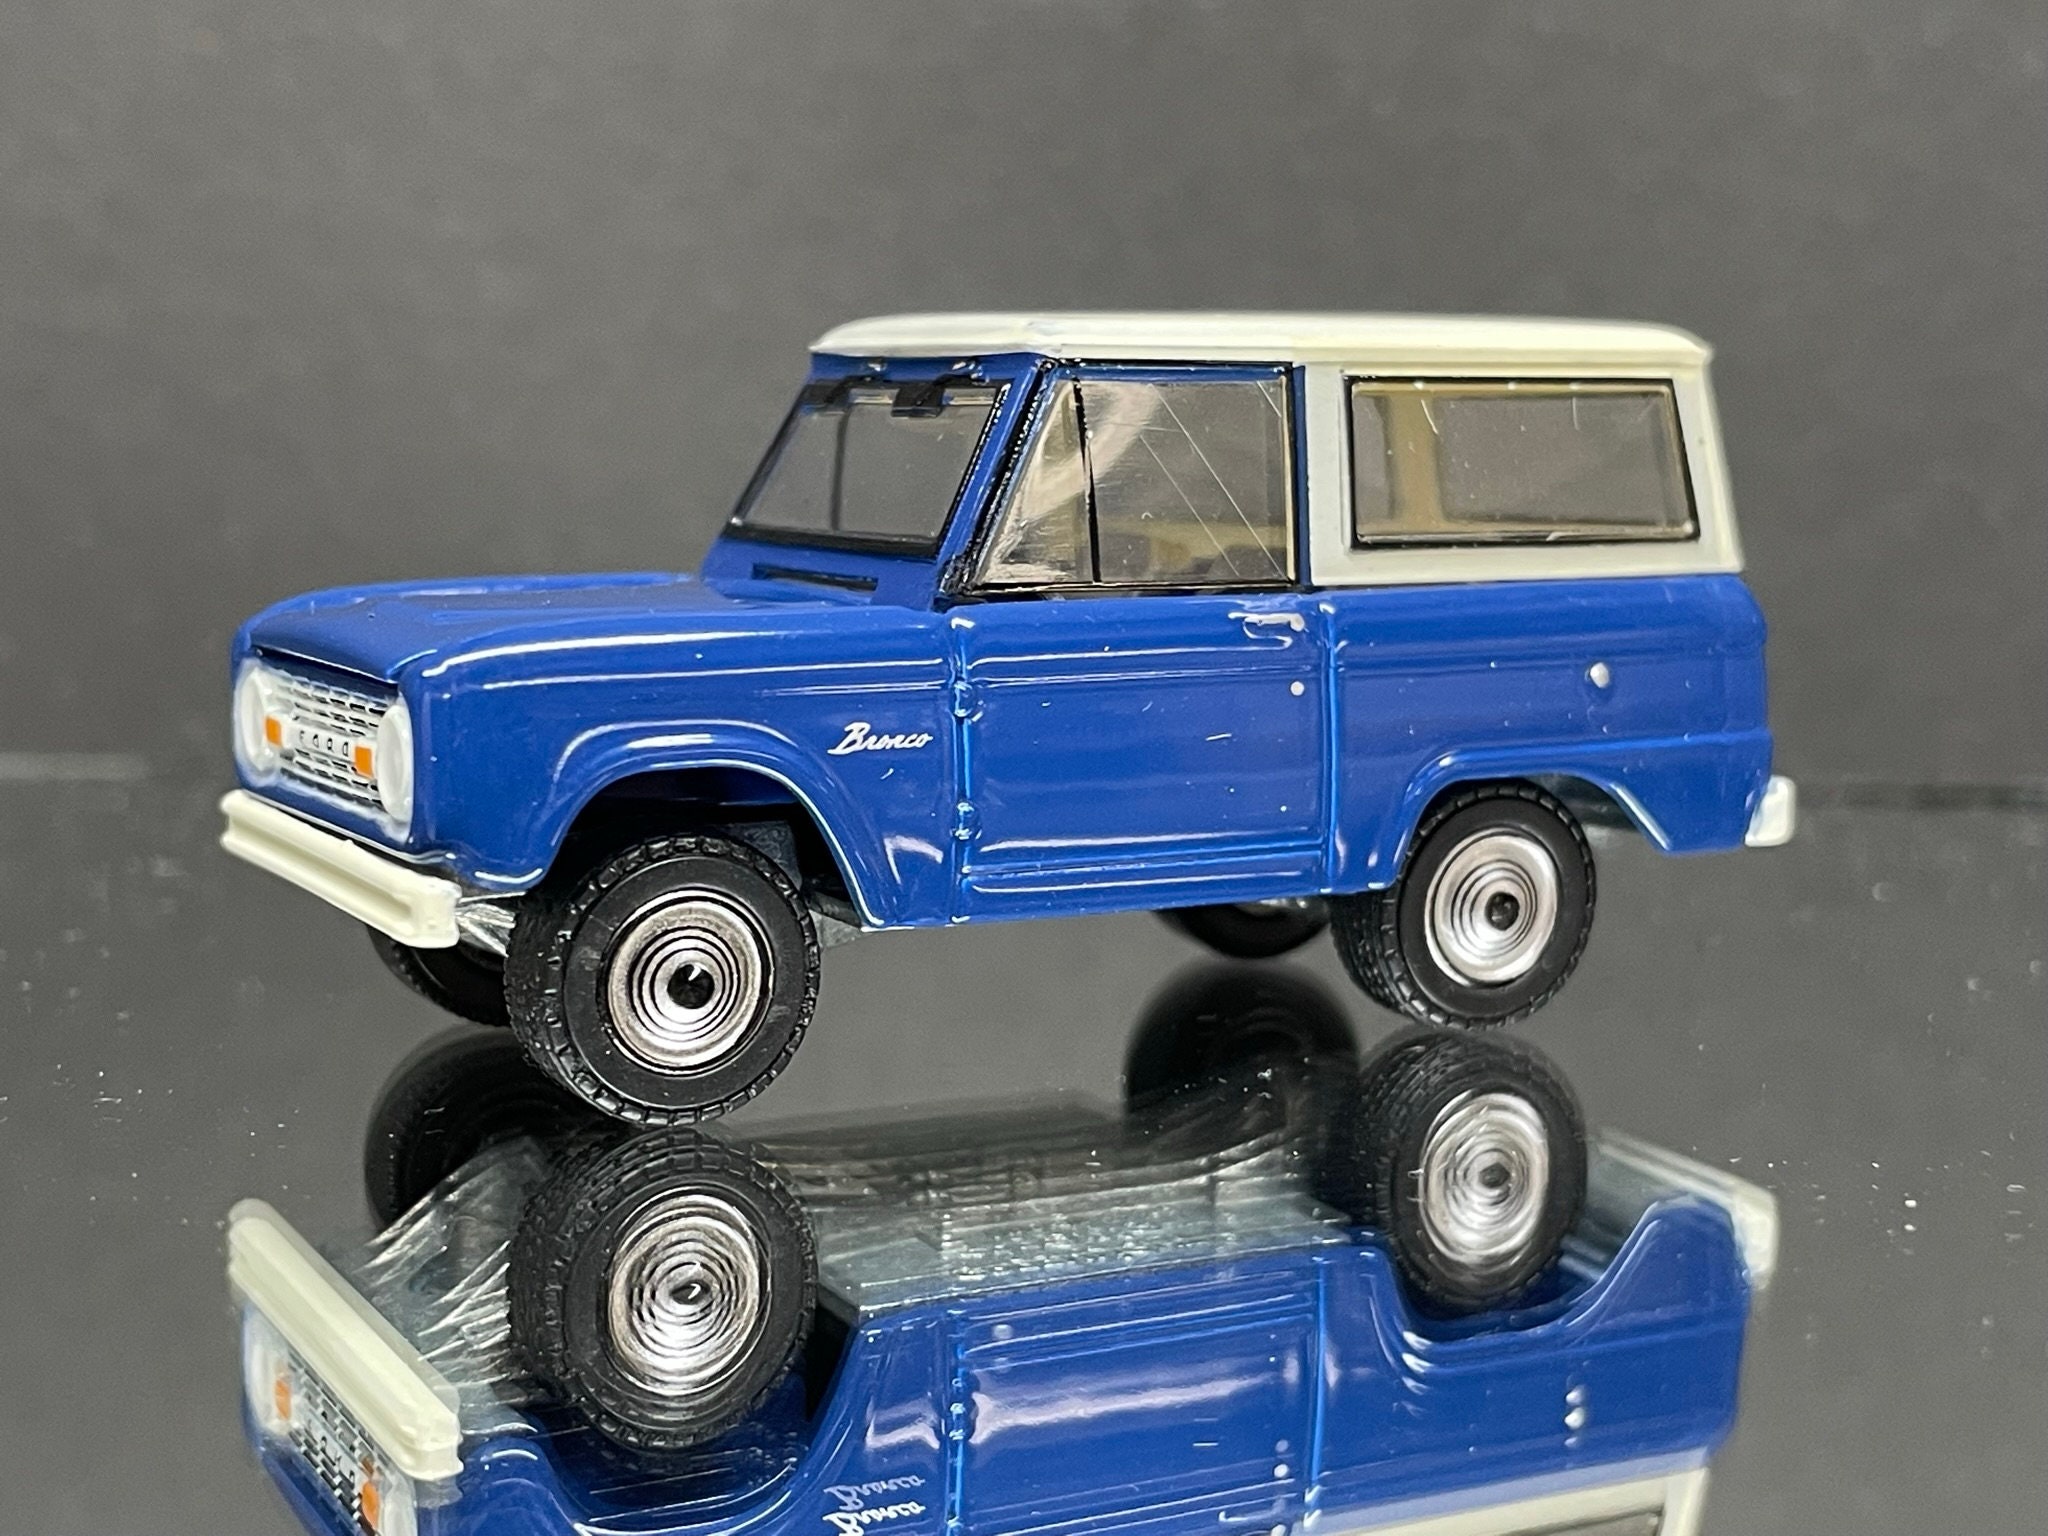 1-64 Scale / S-scale 1966 Ford Bronco Great for Dioramas